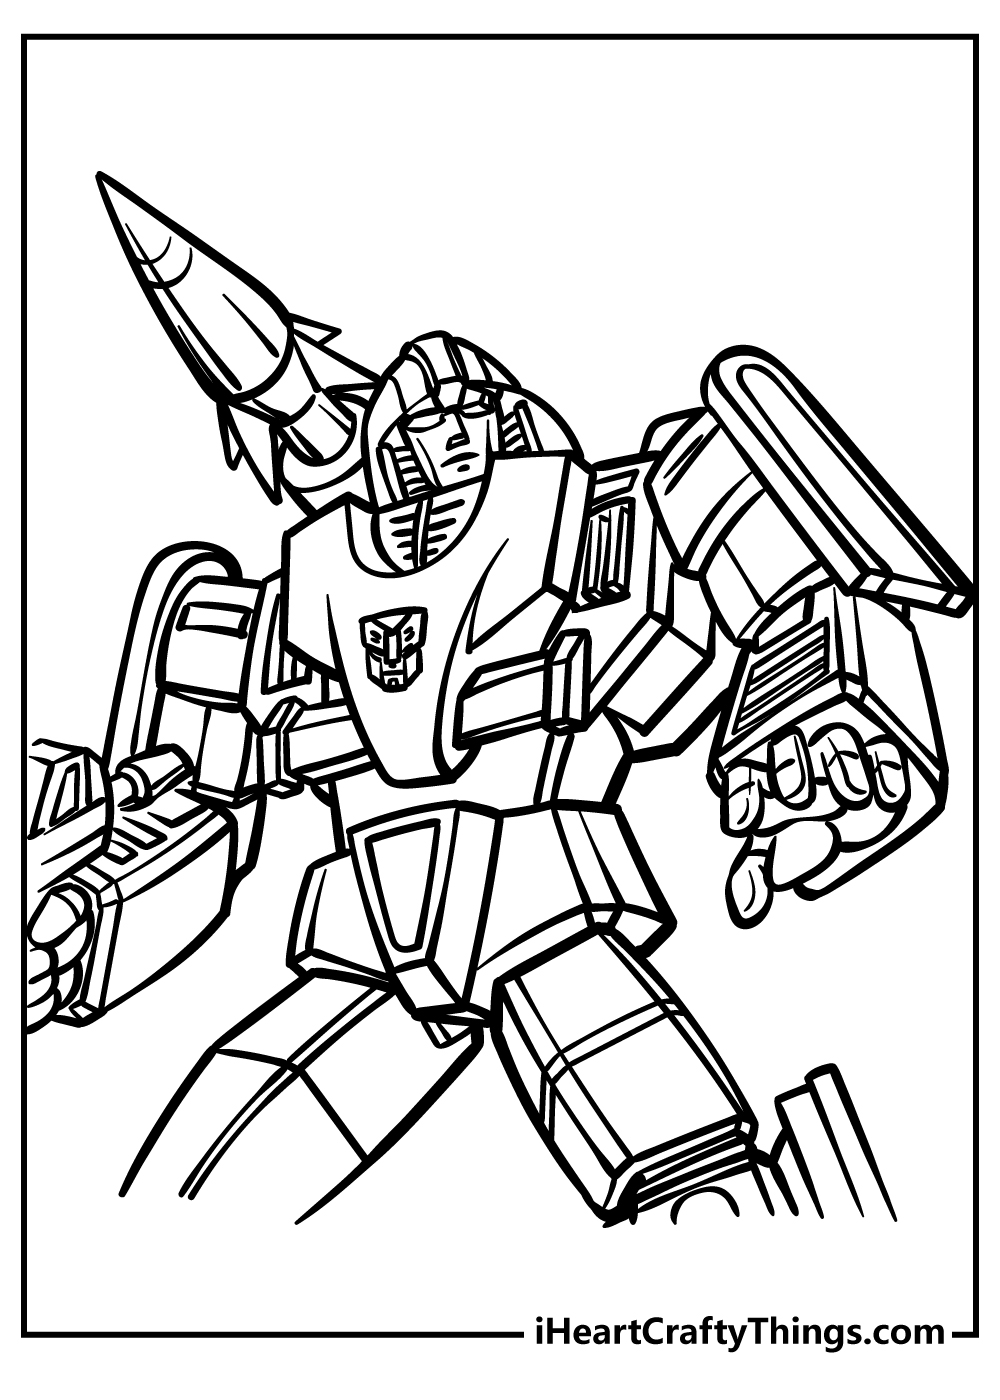 Transformers Coloring Pages for kids free download